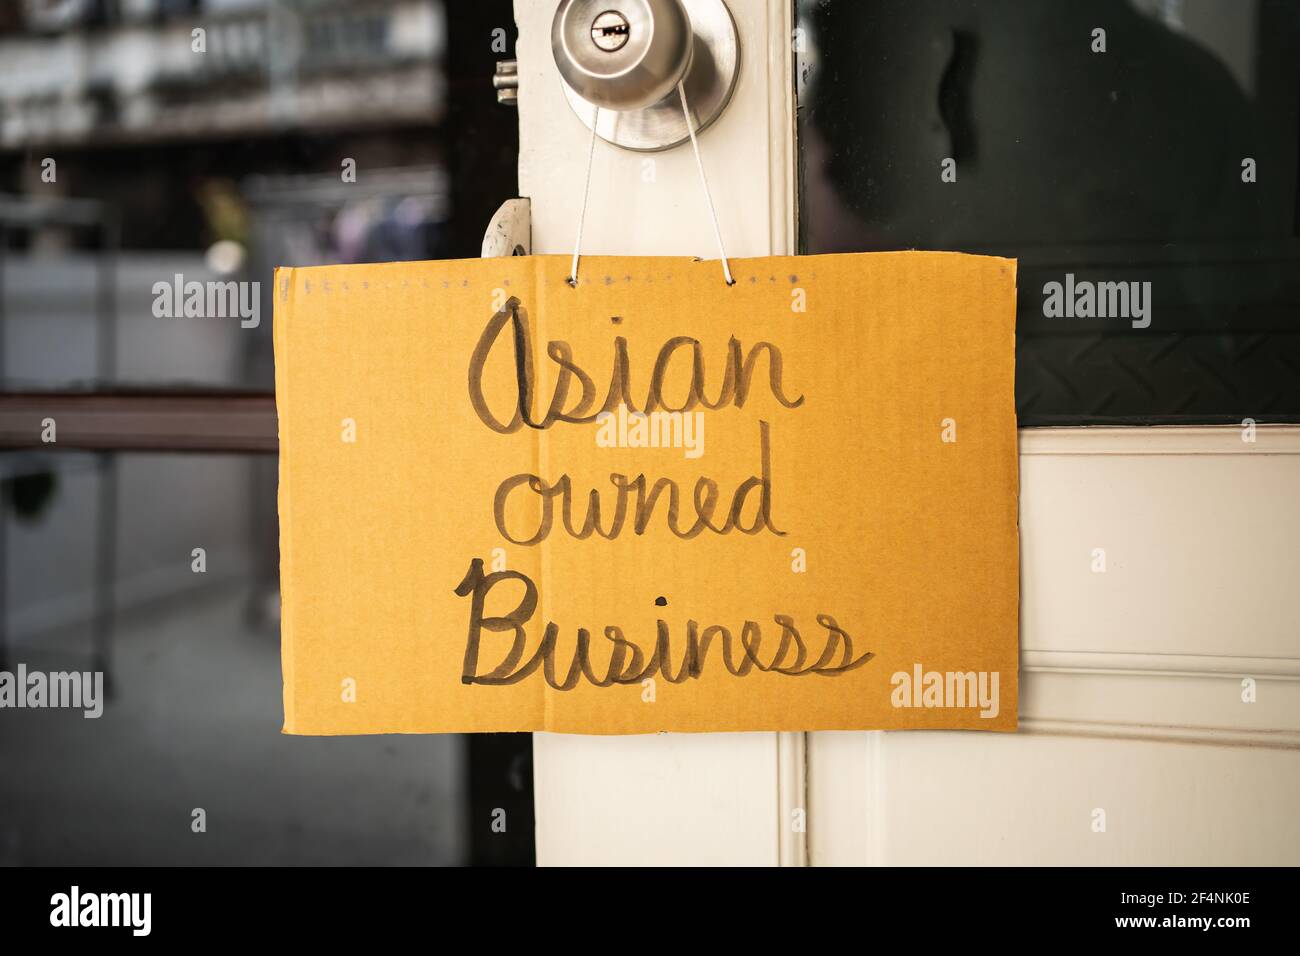 Asian owned business sign was hung on a door knob Stock Photo